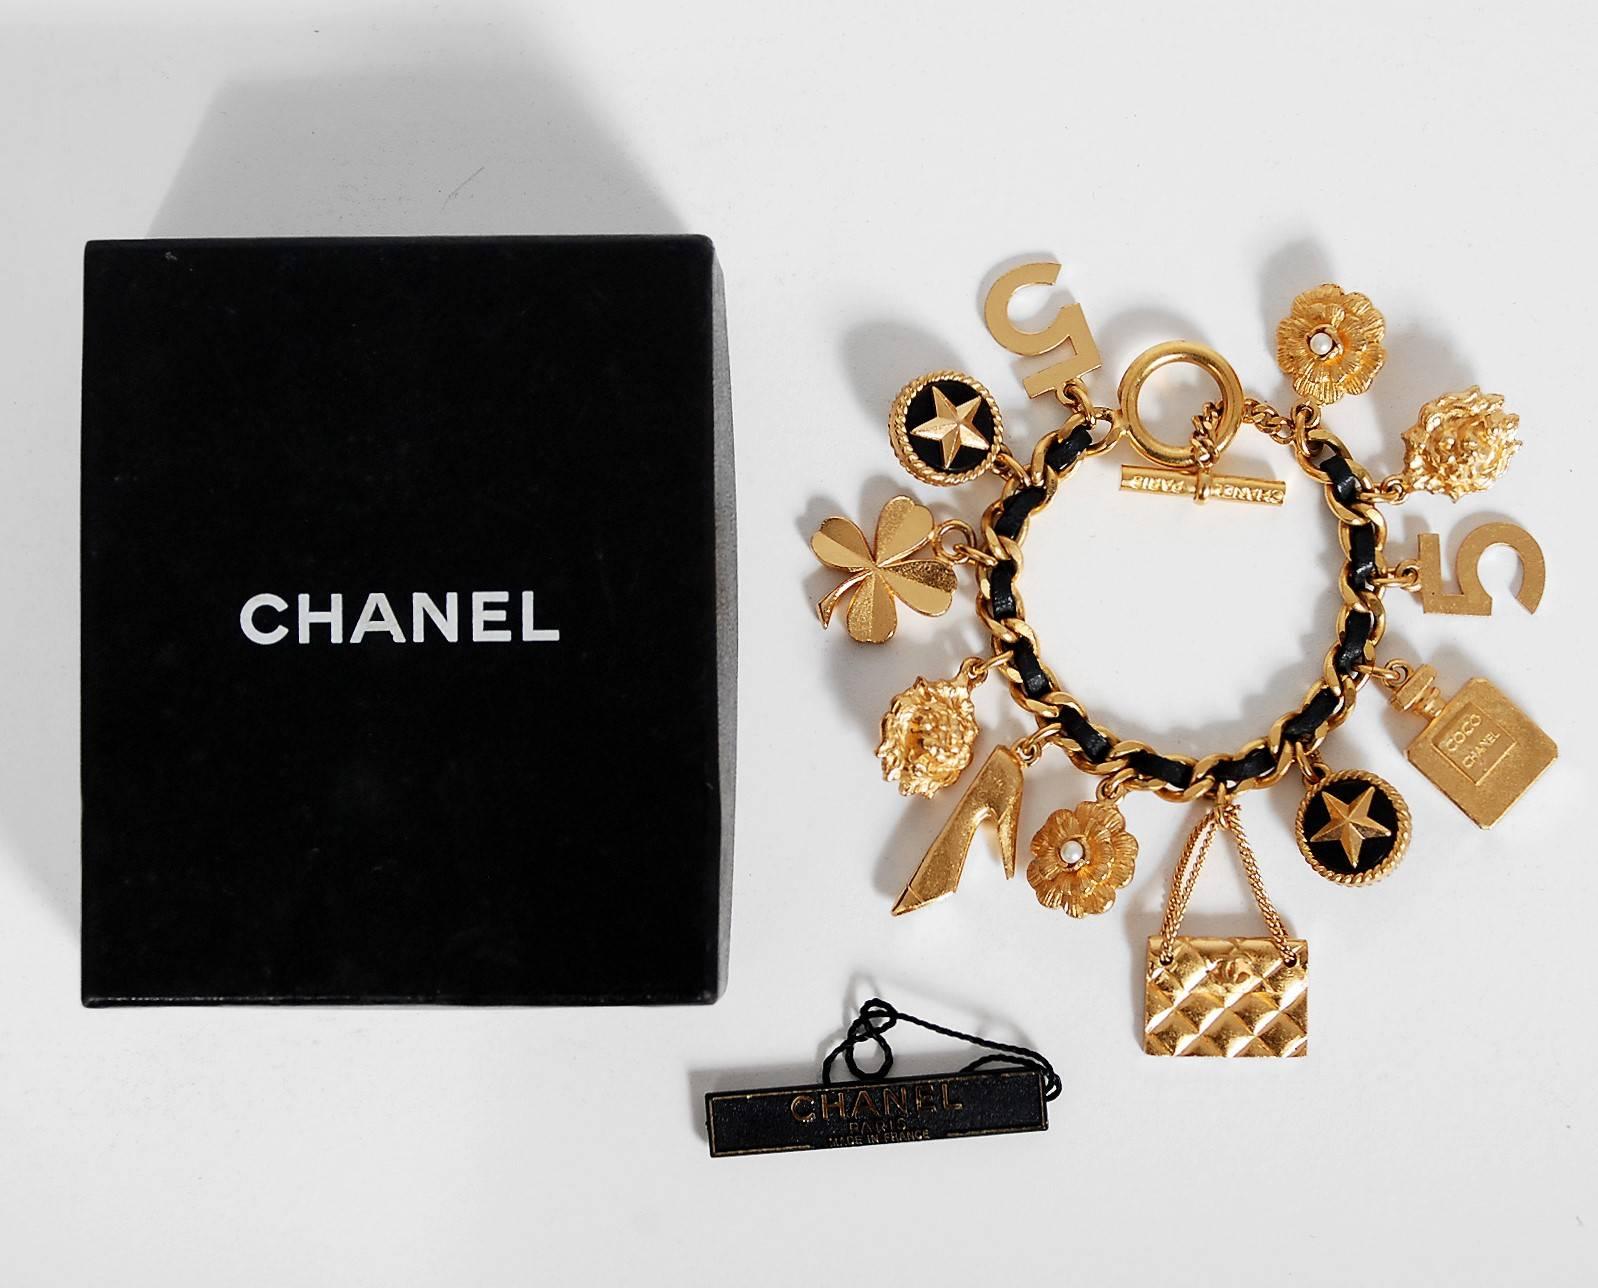 Chanel is known to be one of the most luxurious and decadent fashion houses in the world. This breathtaking gold-toned black woven leather bracelet is a perfect example of why this couture brand has stood the test of time. Selection of charms